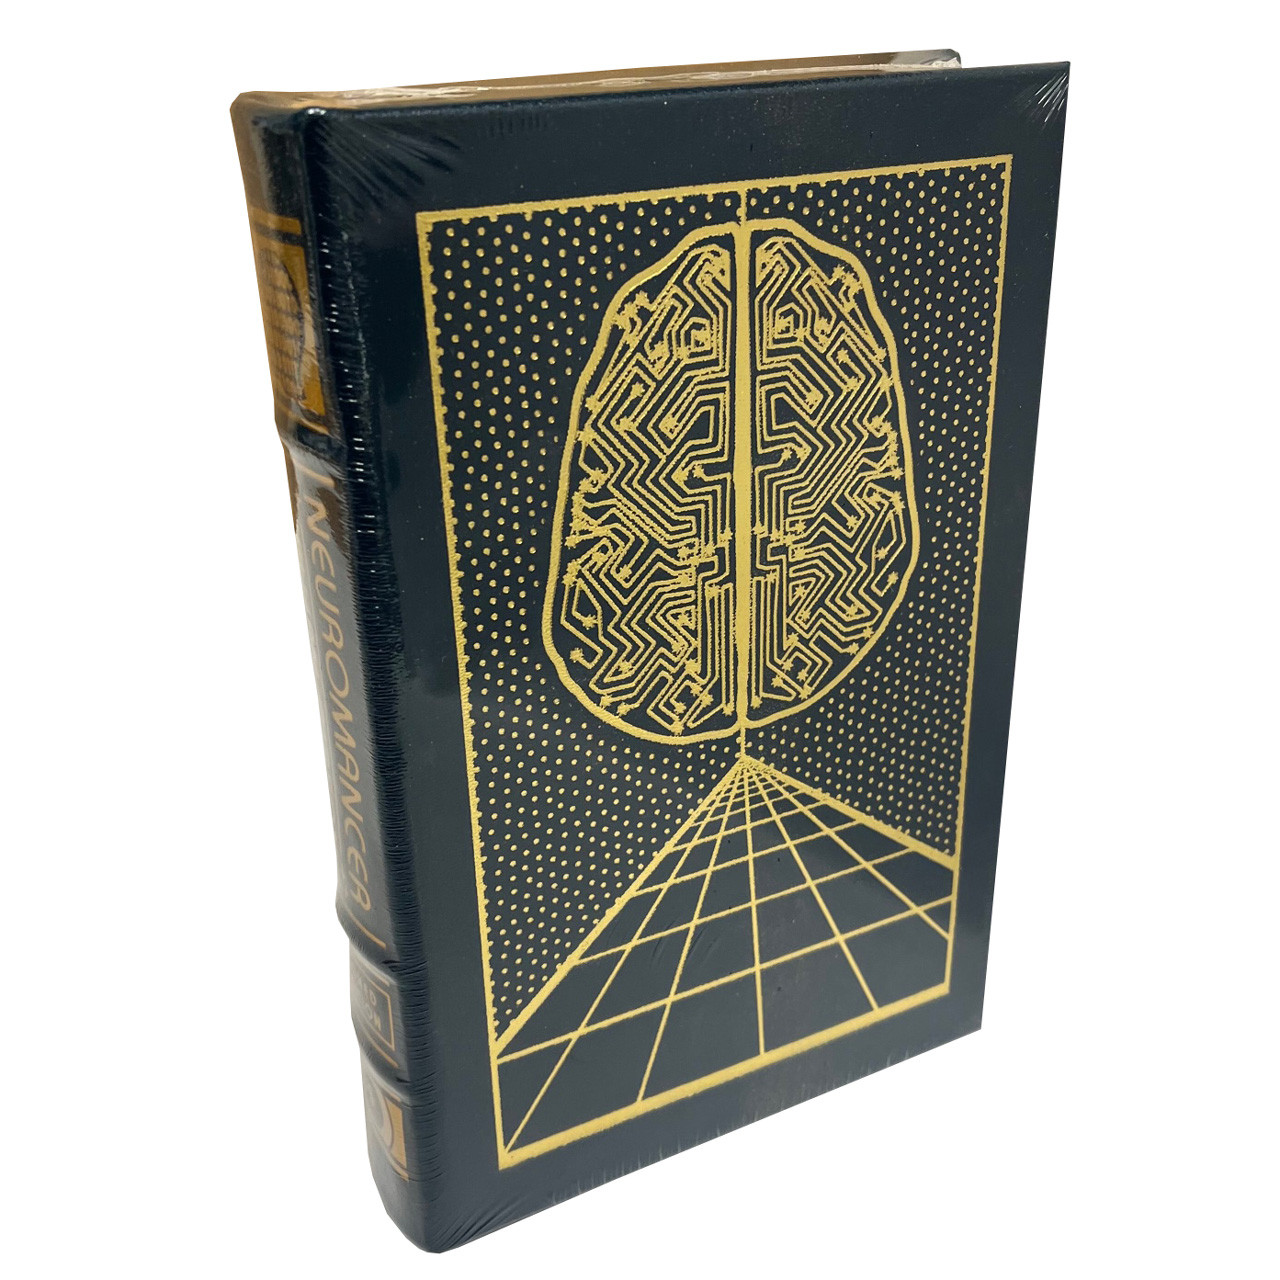 William Gibson "Neuromancer" Signed Limited Edition, Leather Bound Collector's Edition [Sealed]